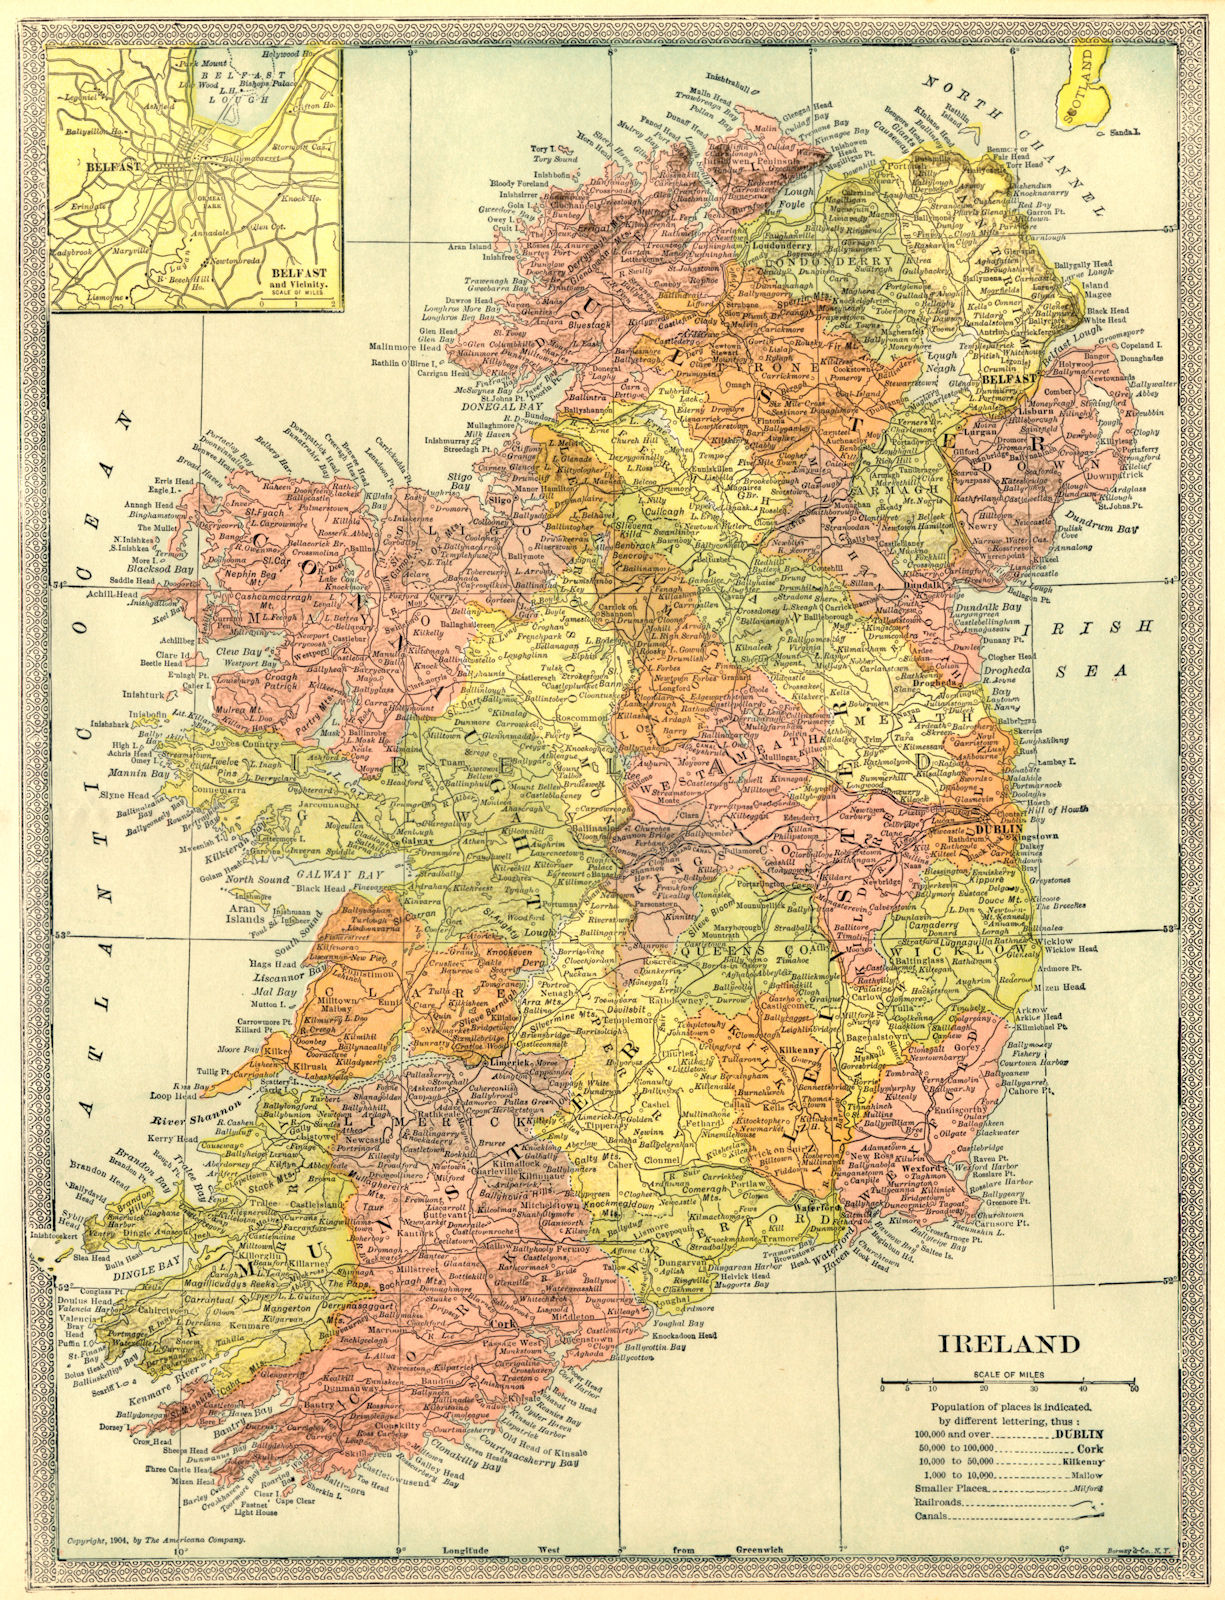 IRELAND showing counties. Pre-partition. Inset Belfast 1907 old antique map